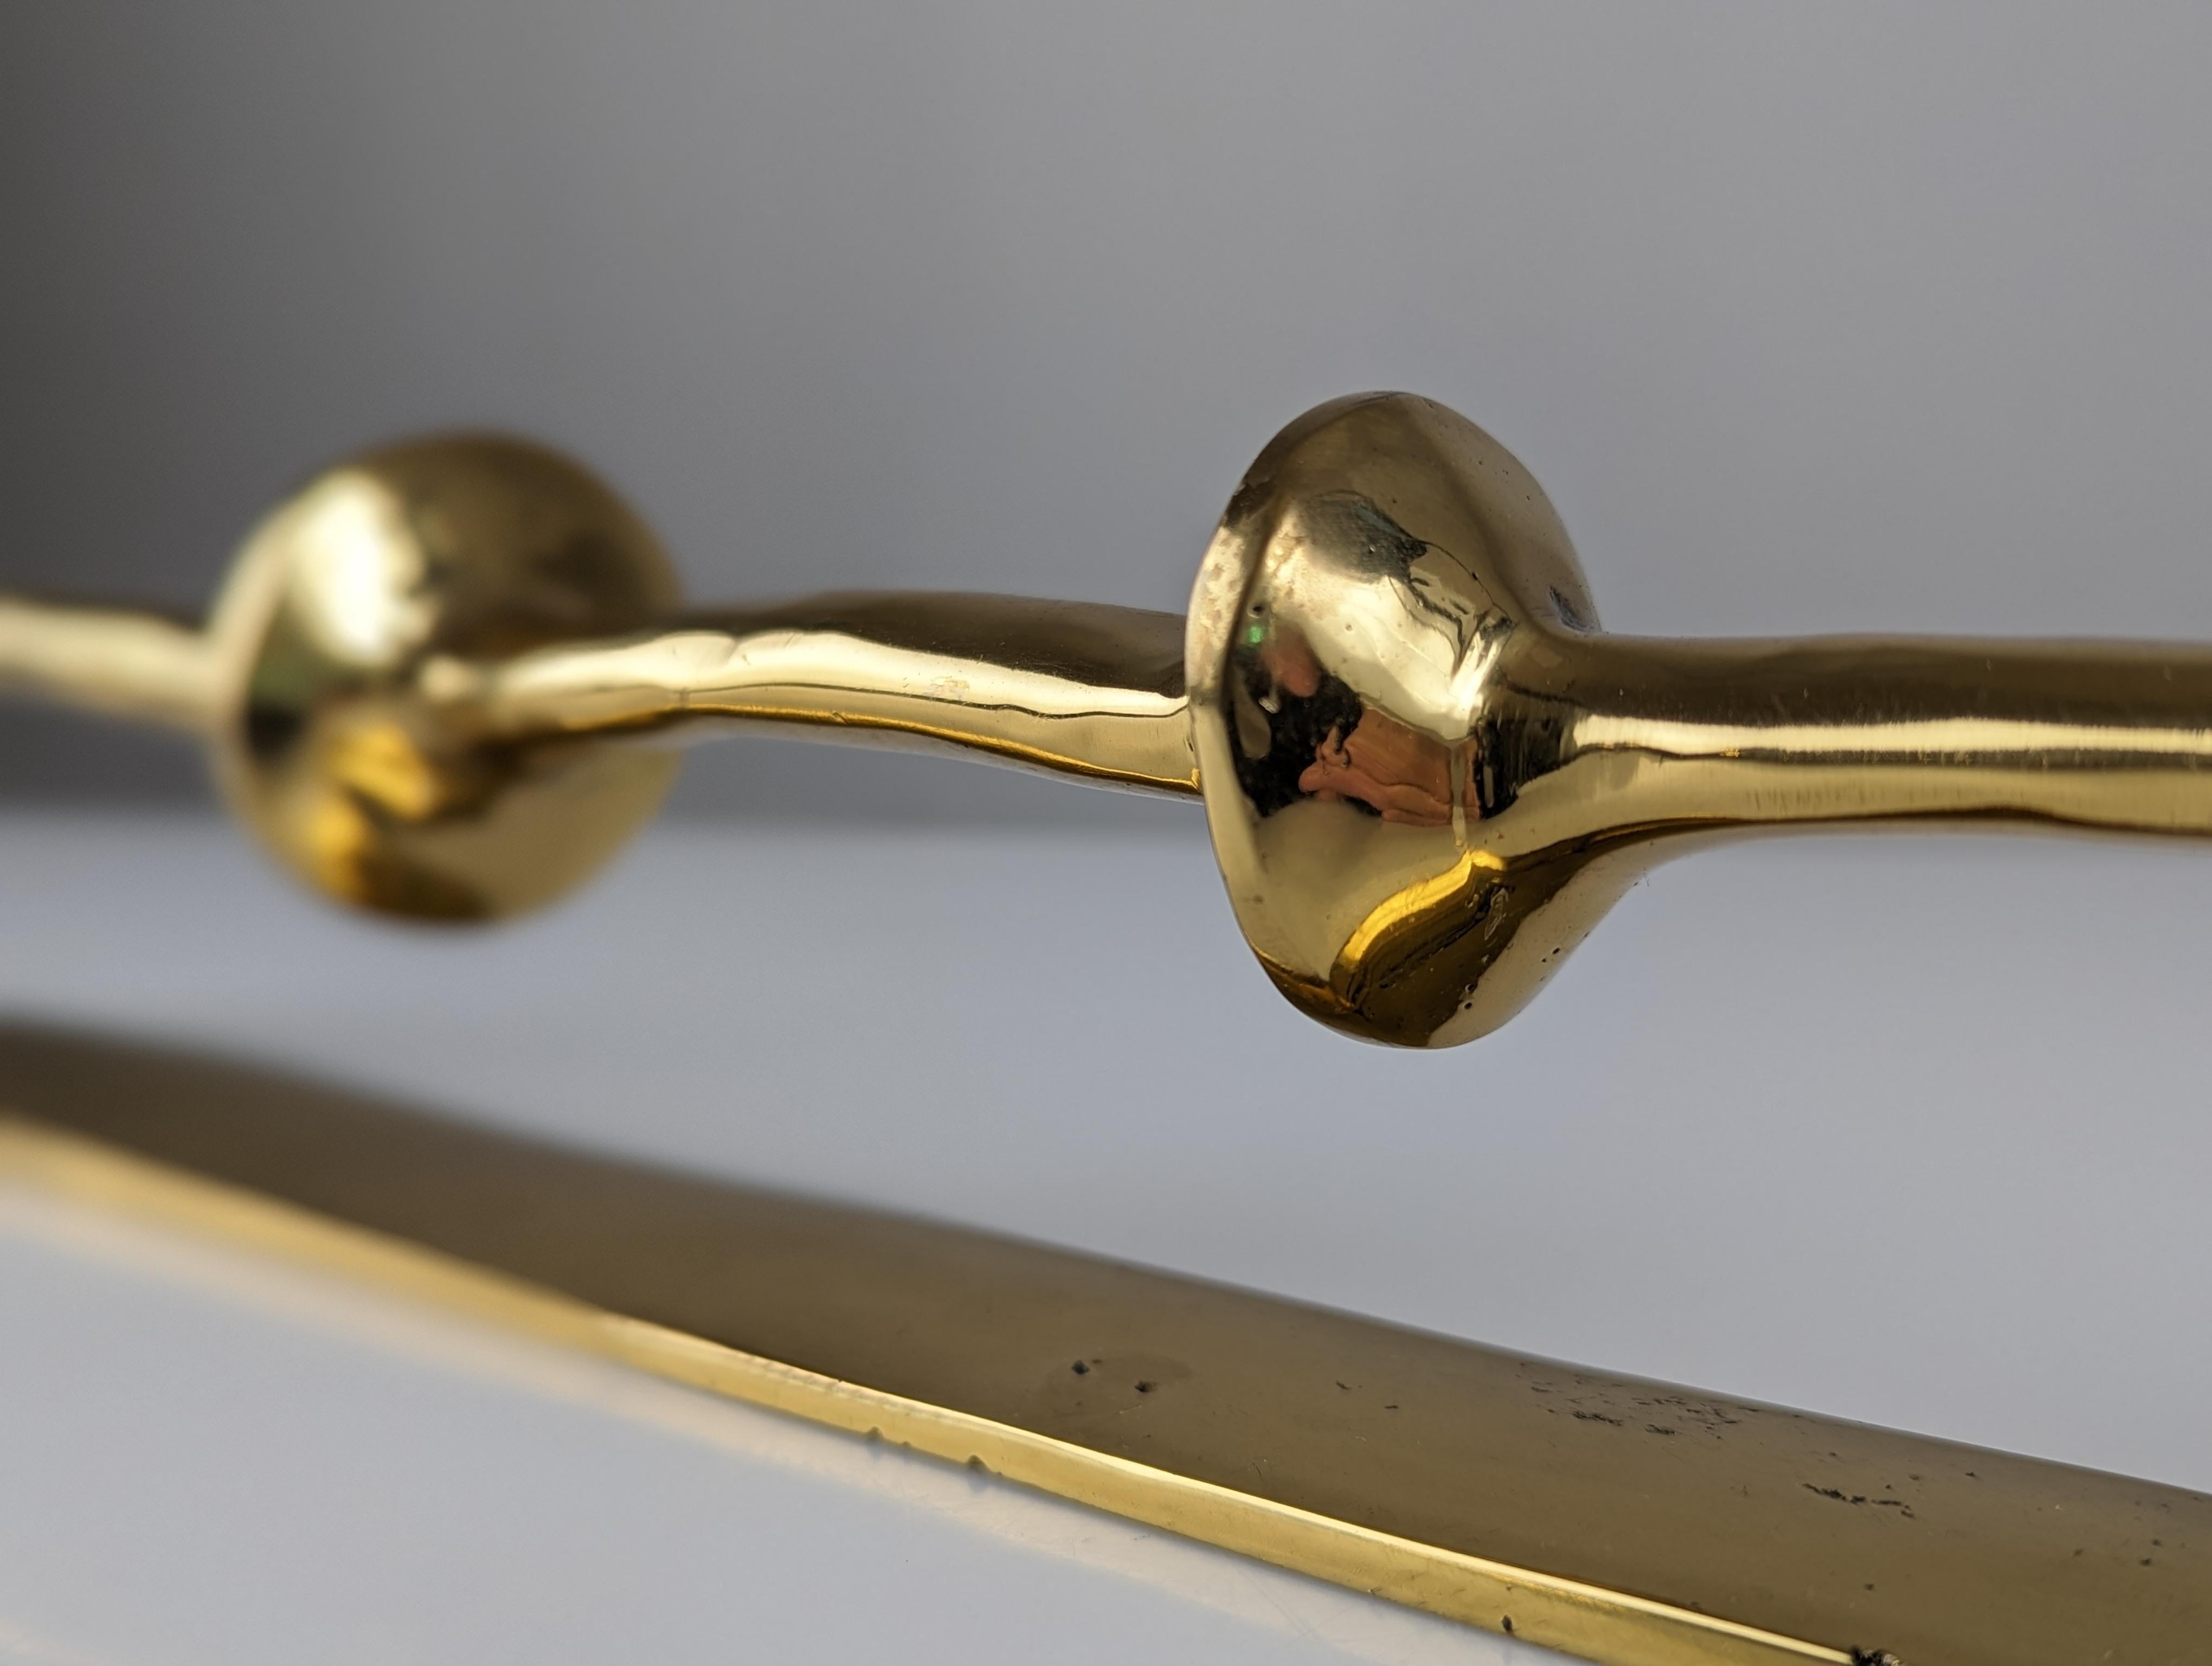 Spectacular large handle signed by the artist David Marshall made entirely of bronze. An authentic, very versatile sculptural work that can delight any decoration as a door handle, whether horizontal or vertical, coat rack, support, even towel rack.